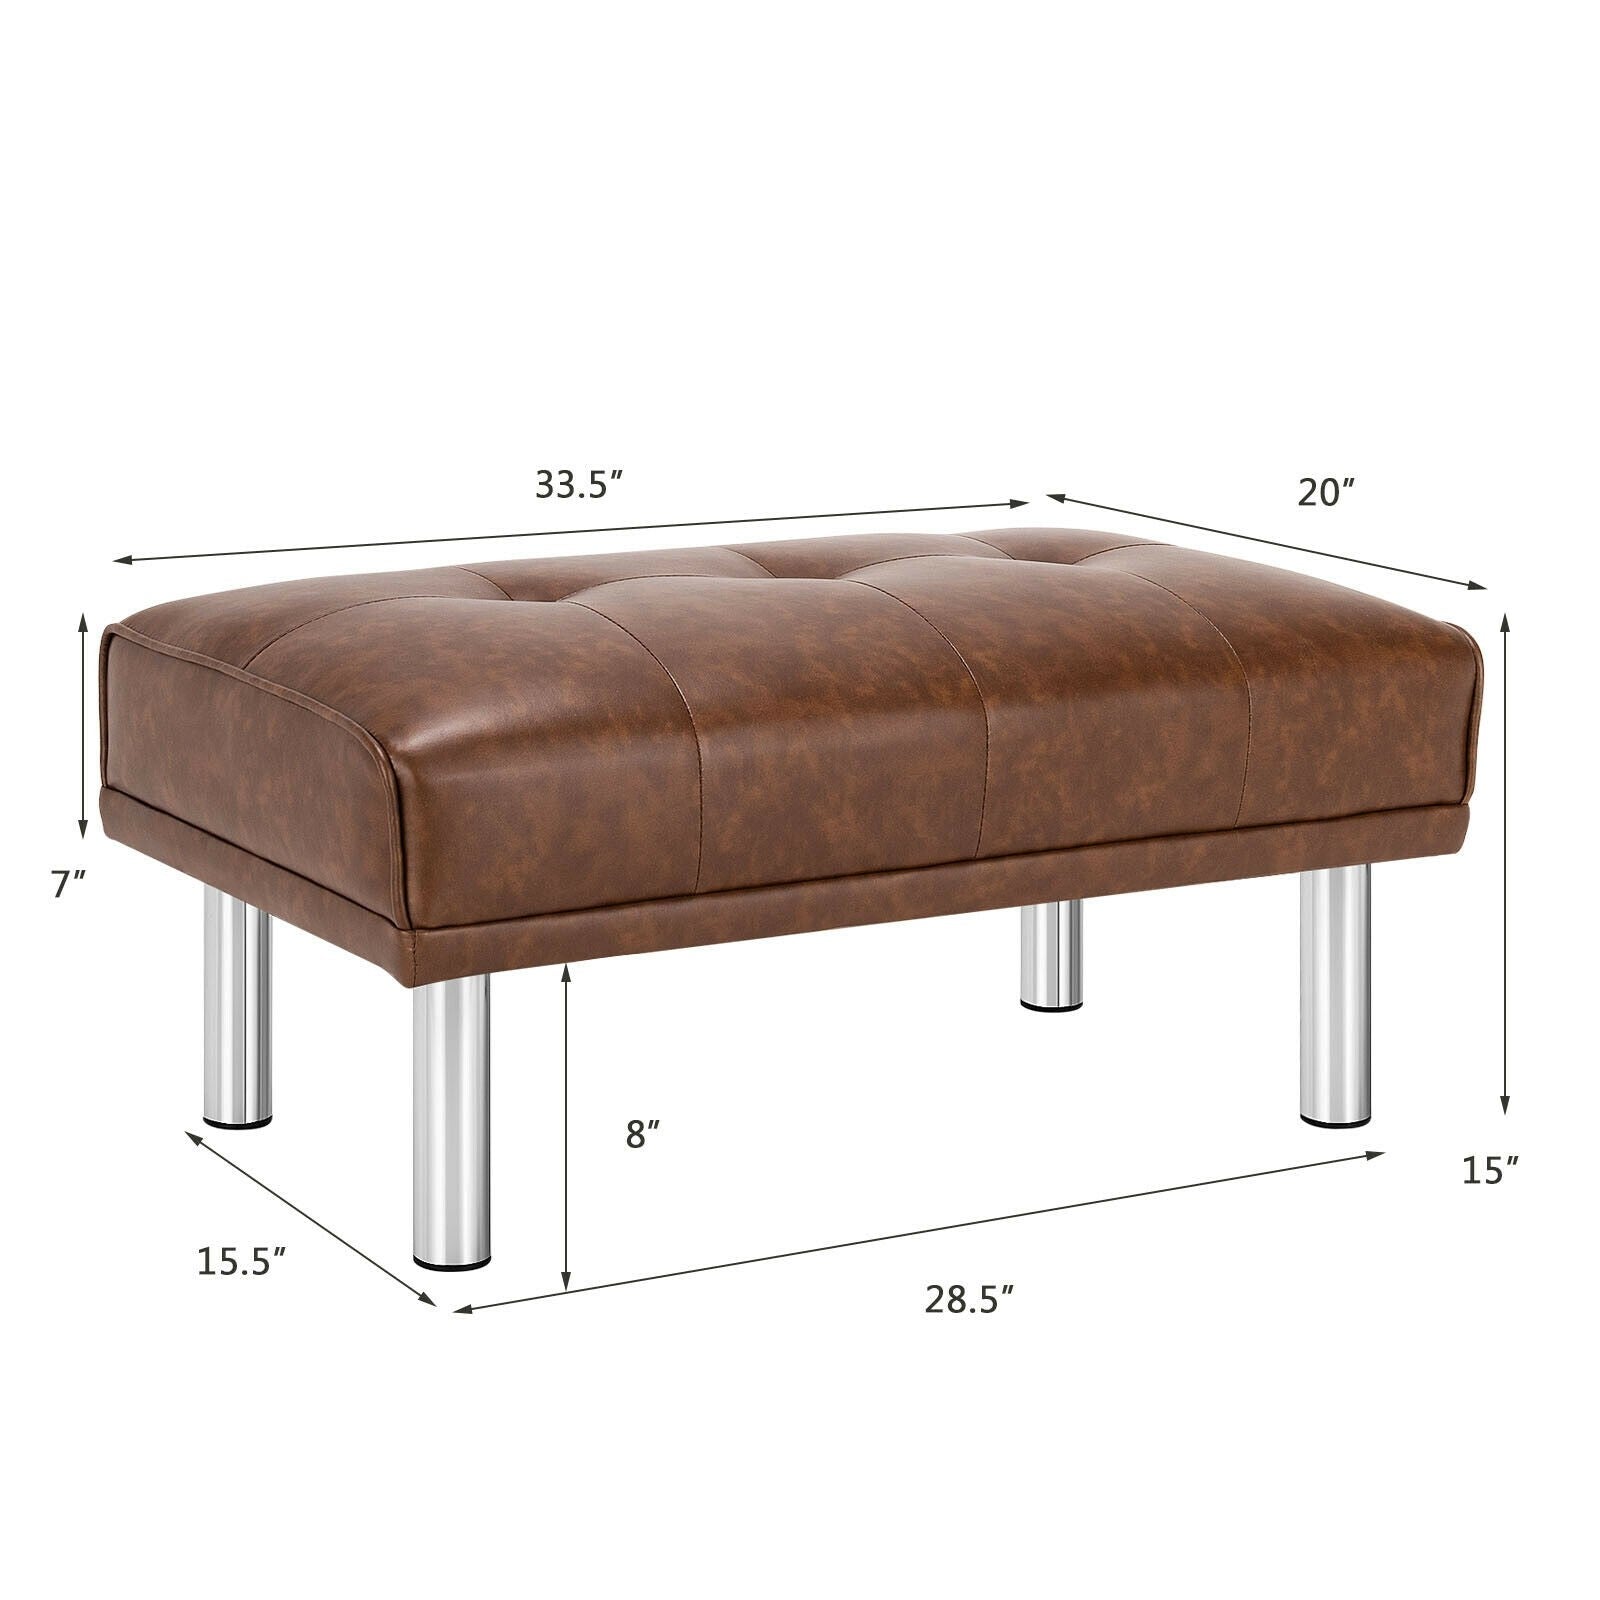 Tufted Ottoman, Rectangle Footrest Stool with Stainless Steel Legs